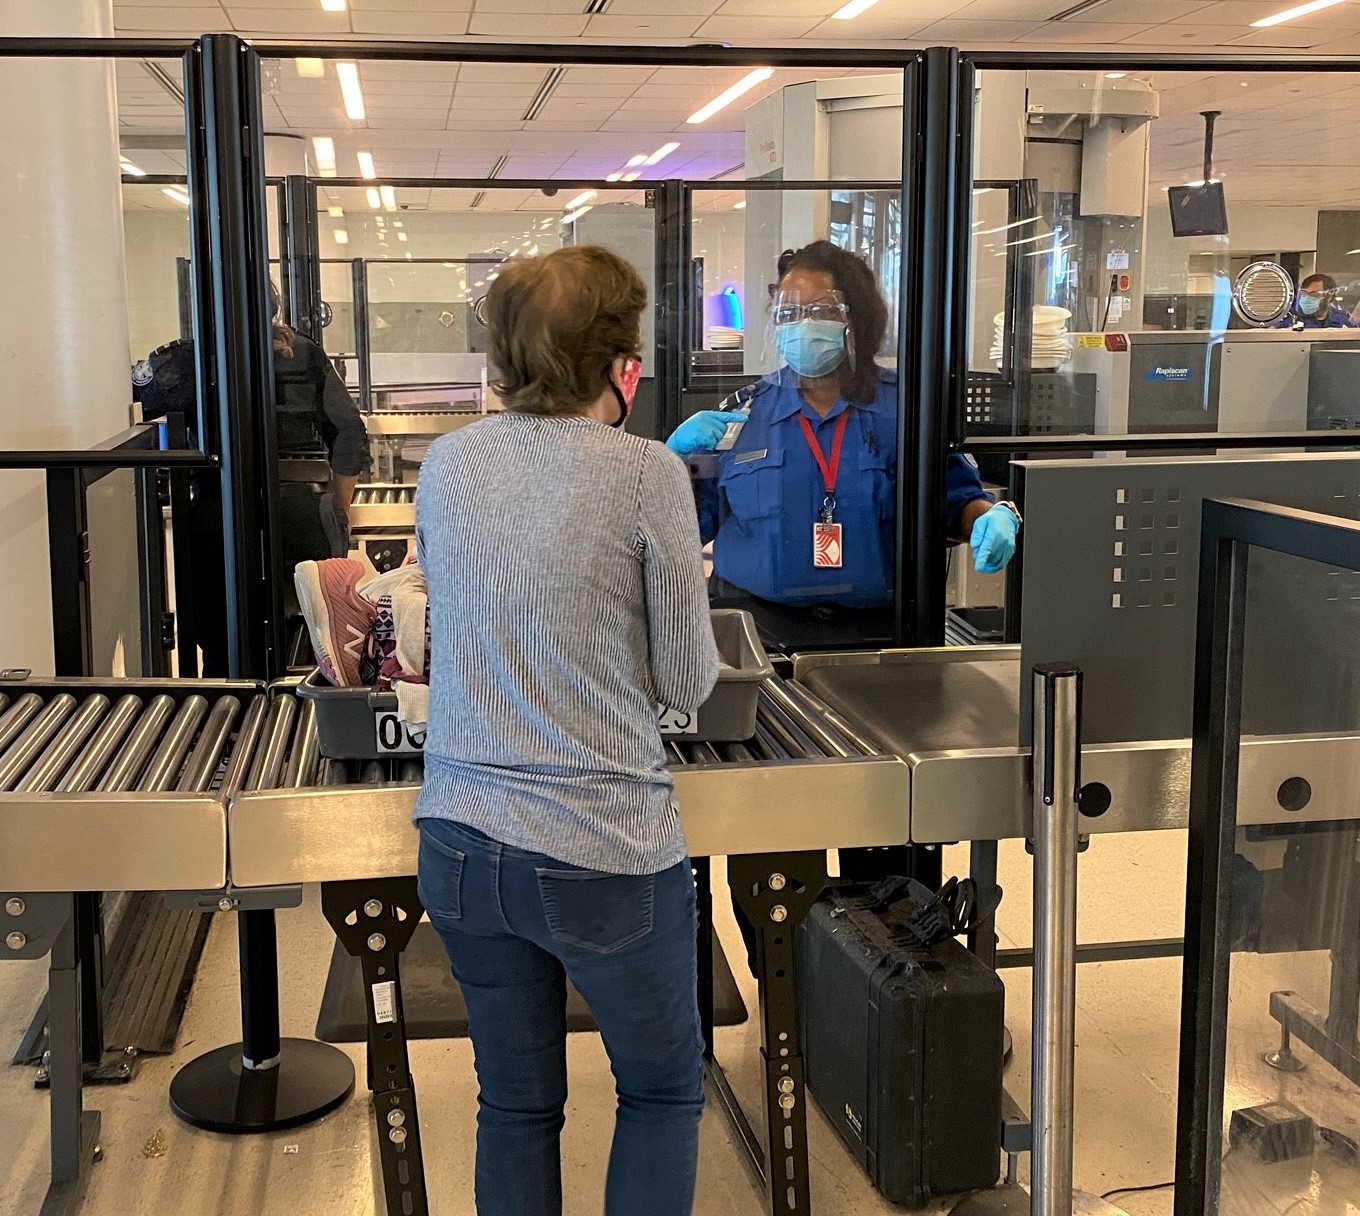 Acrylic shields to help protect passengers and TSA officers are being installed by the agency at PHL